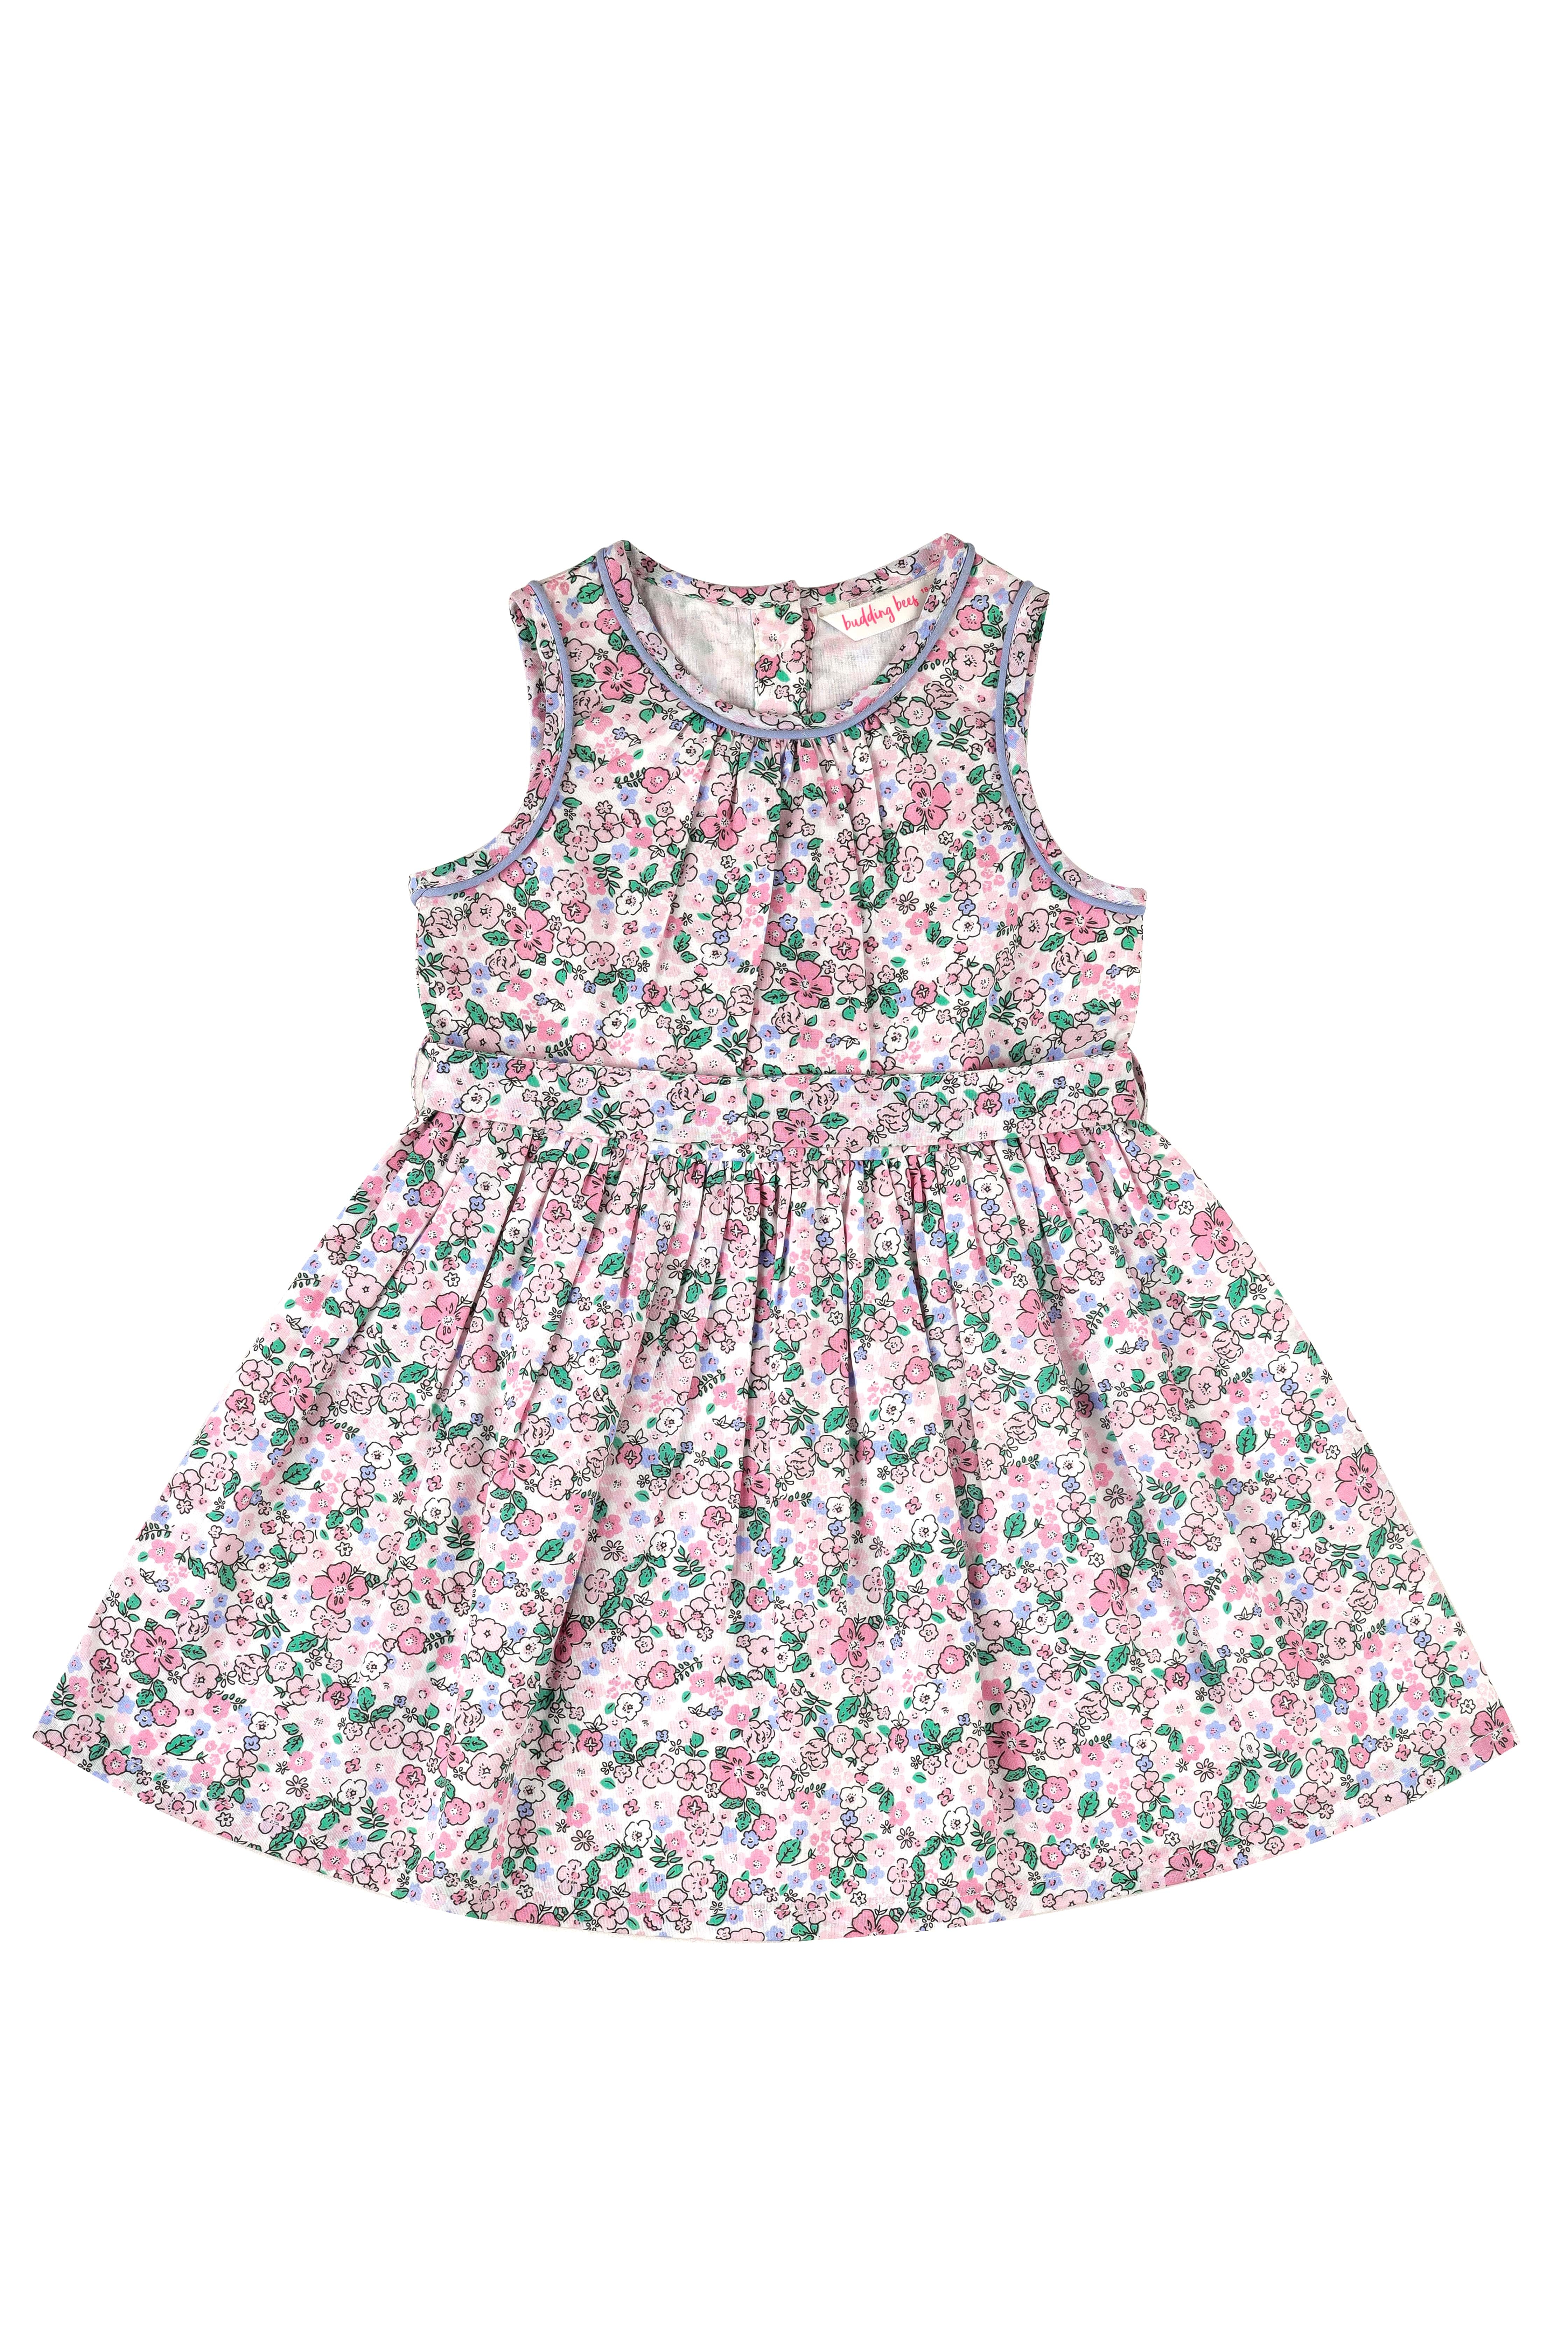 Budding Bees | Budding Bees Baby Girls Floral Dress